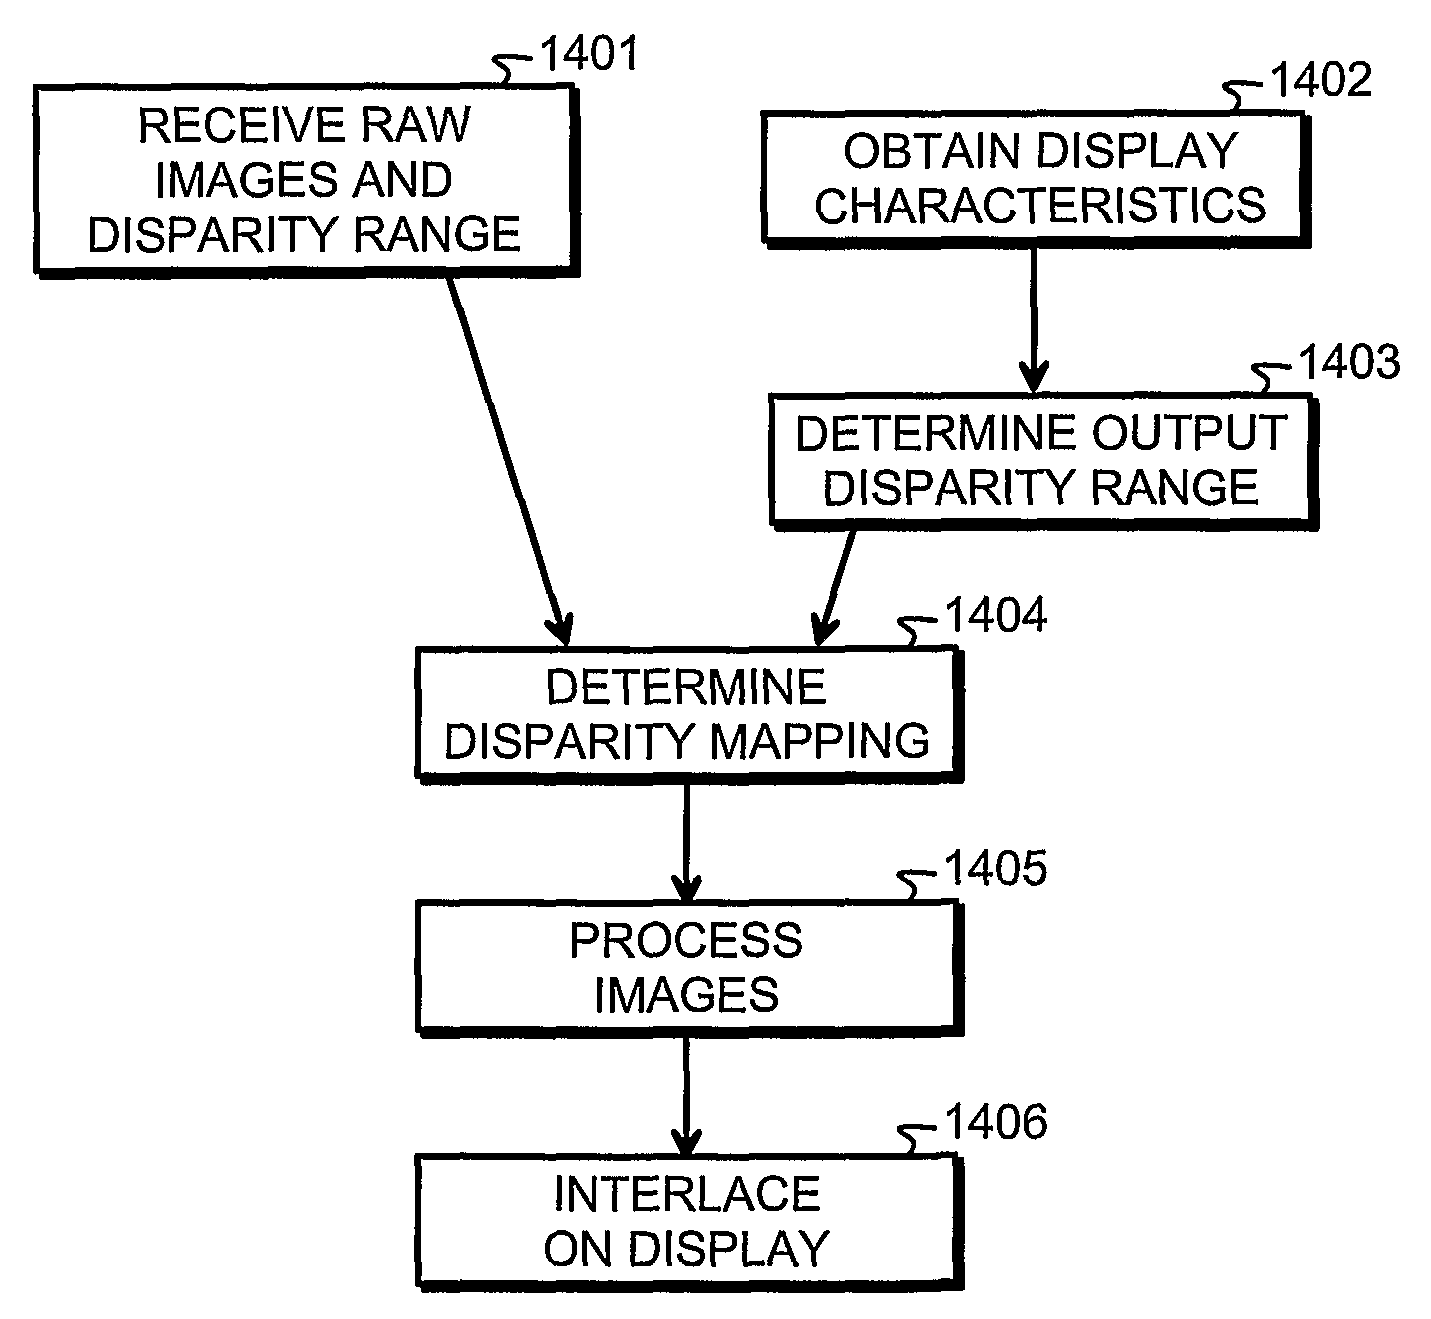 Method and Devices for Generating, Transferring and Processing Three-Dimensional Image Data